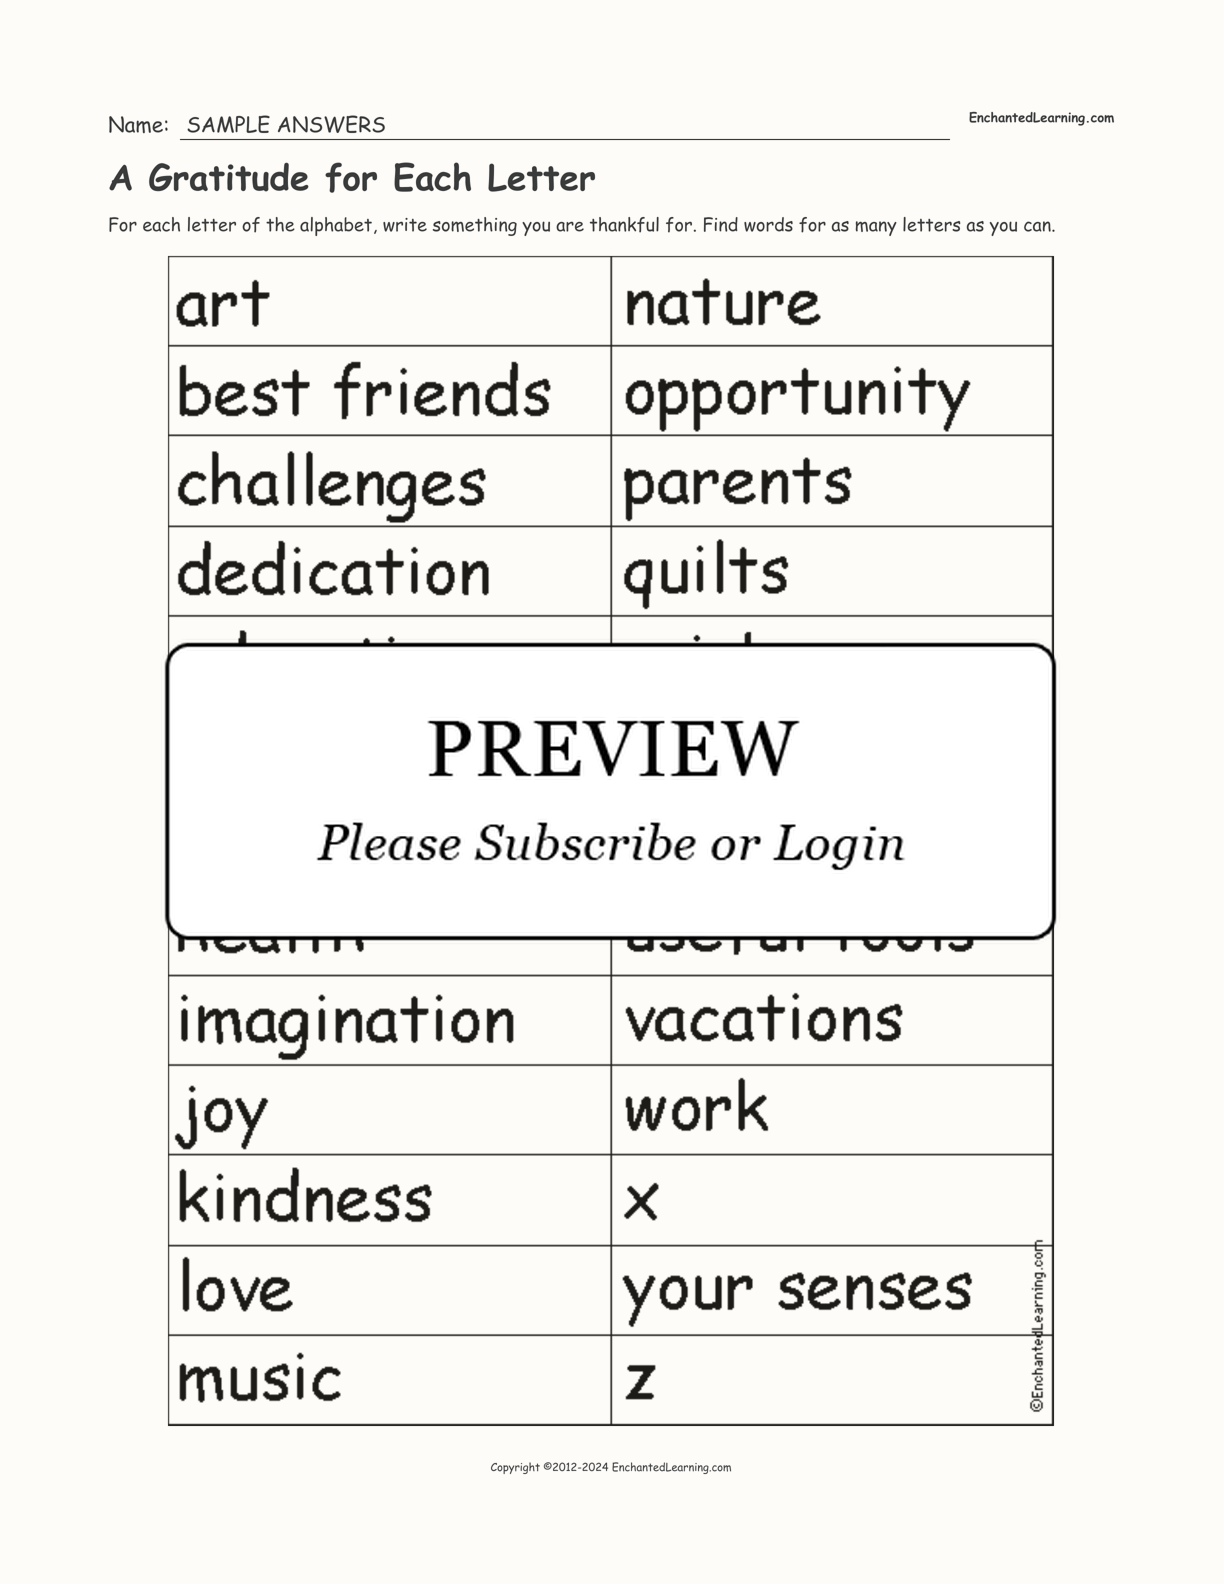 A Gratitude for Each Letter interactive worksheet page 2